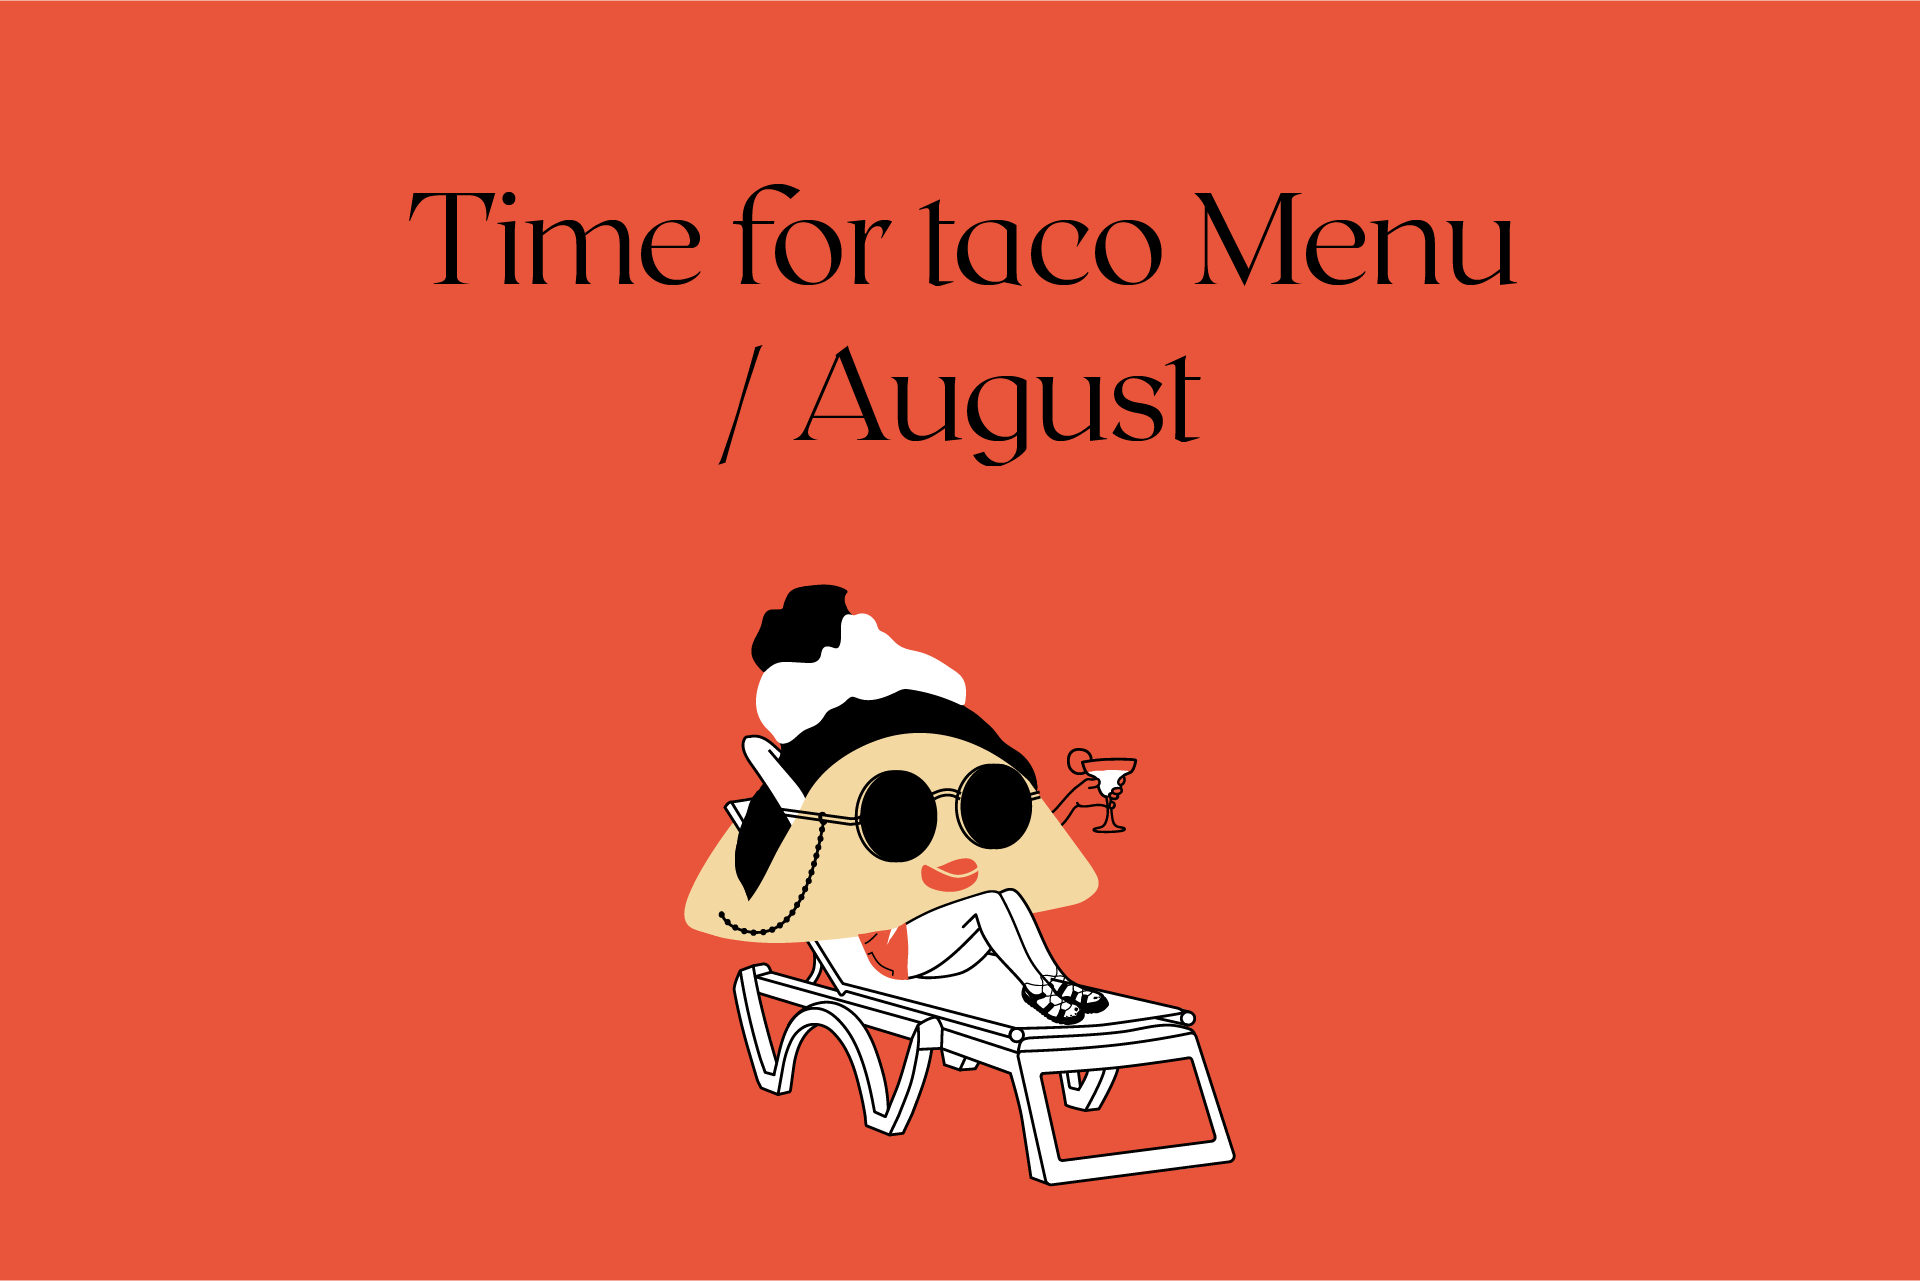 Time for taco Menu / August ’20